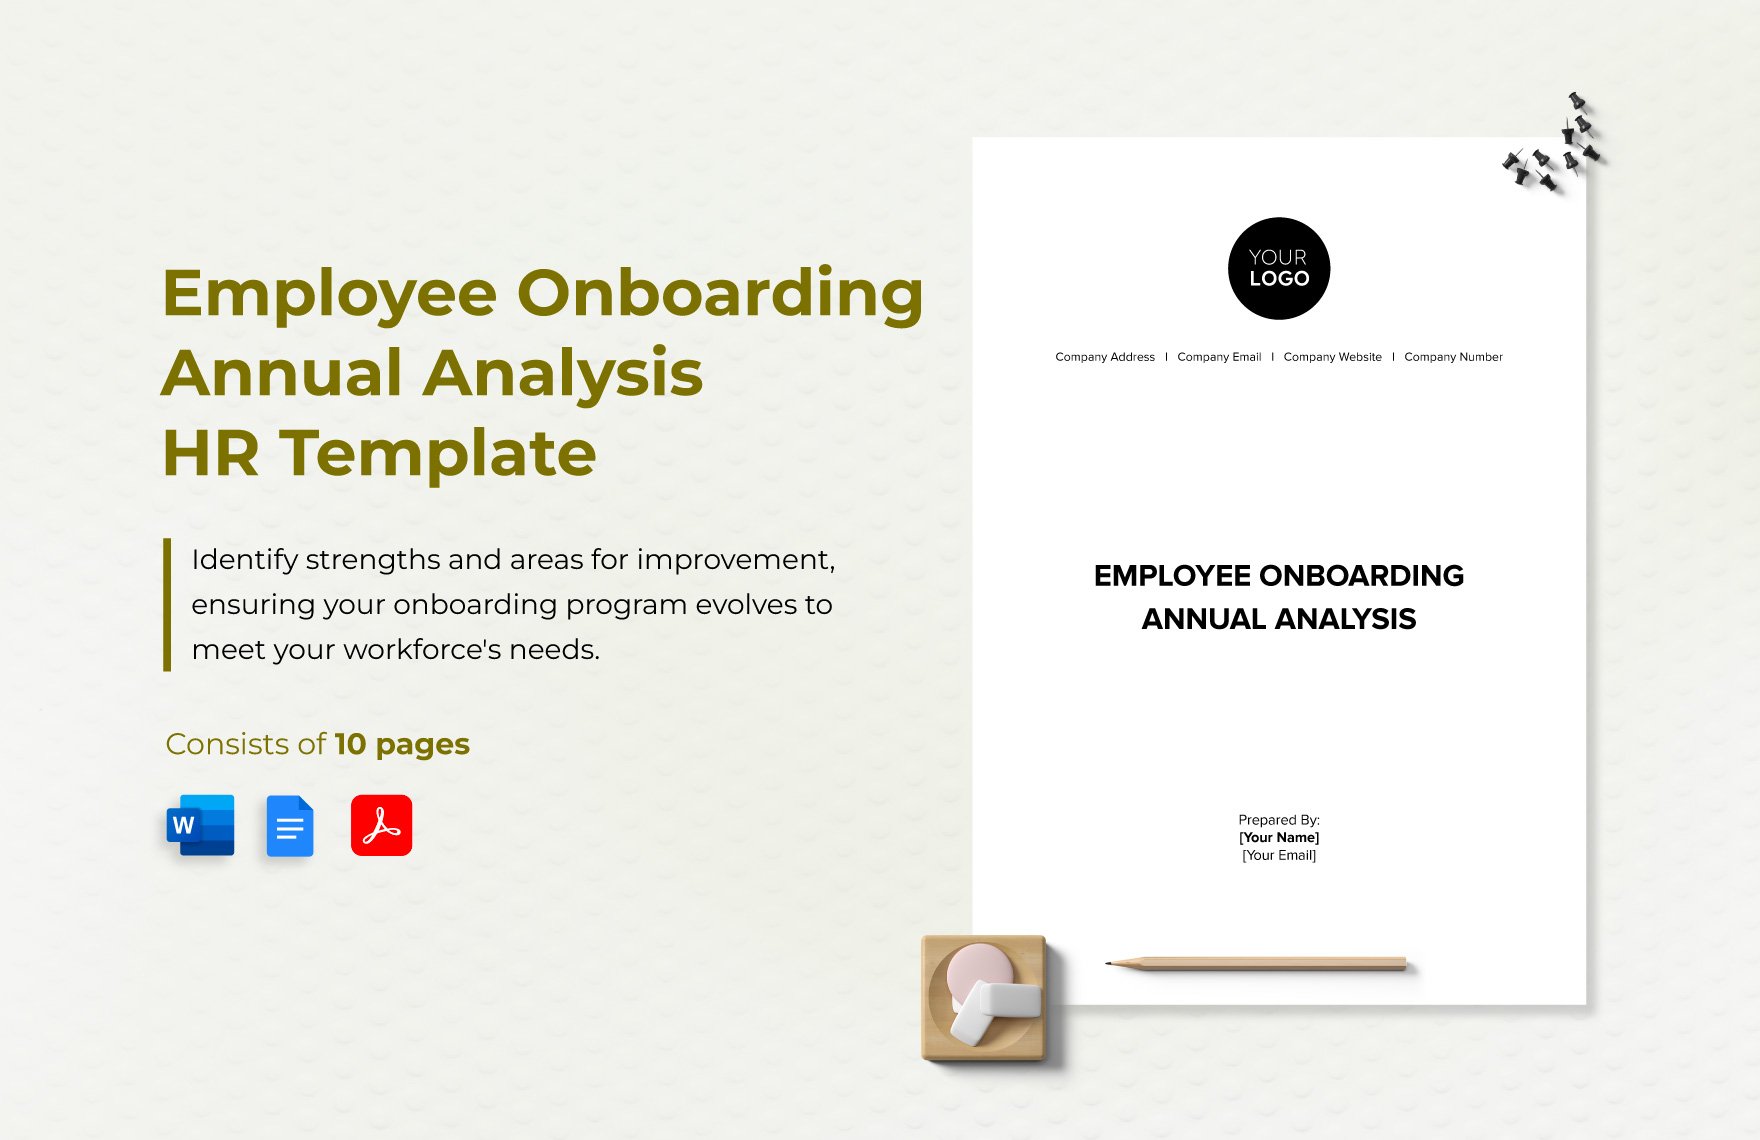 Employee Onboarding Annual Analysis HR Template